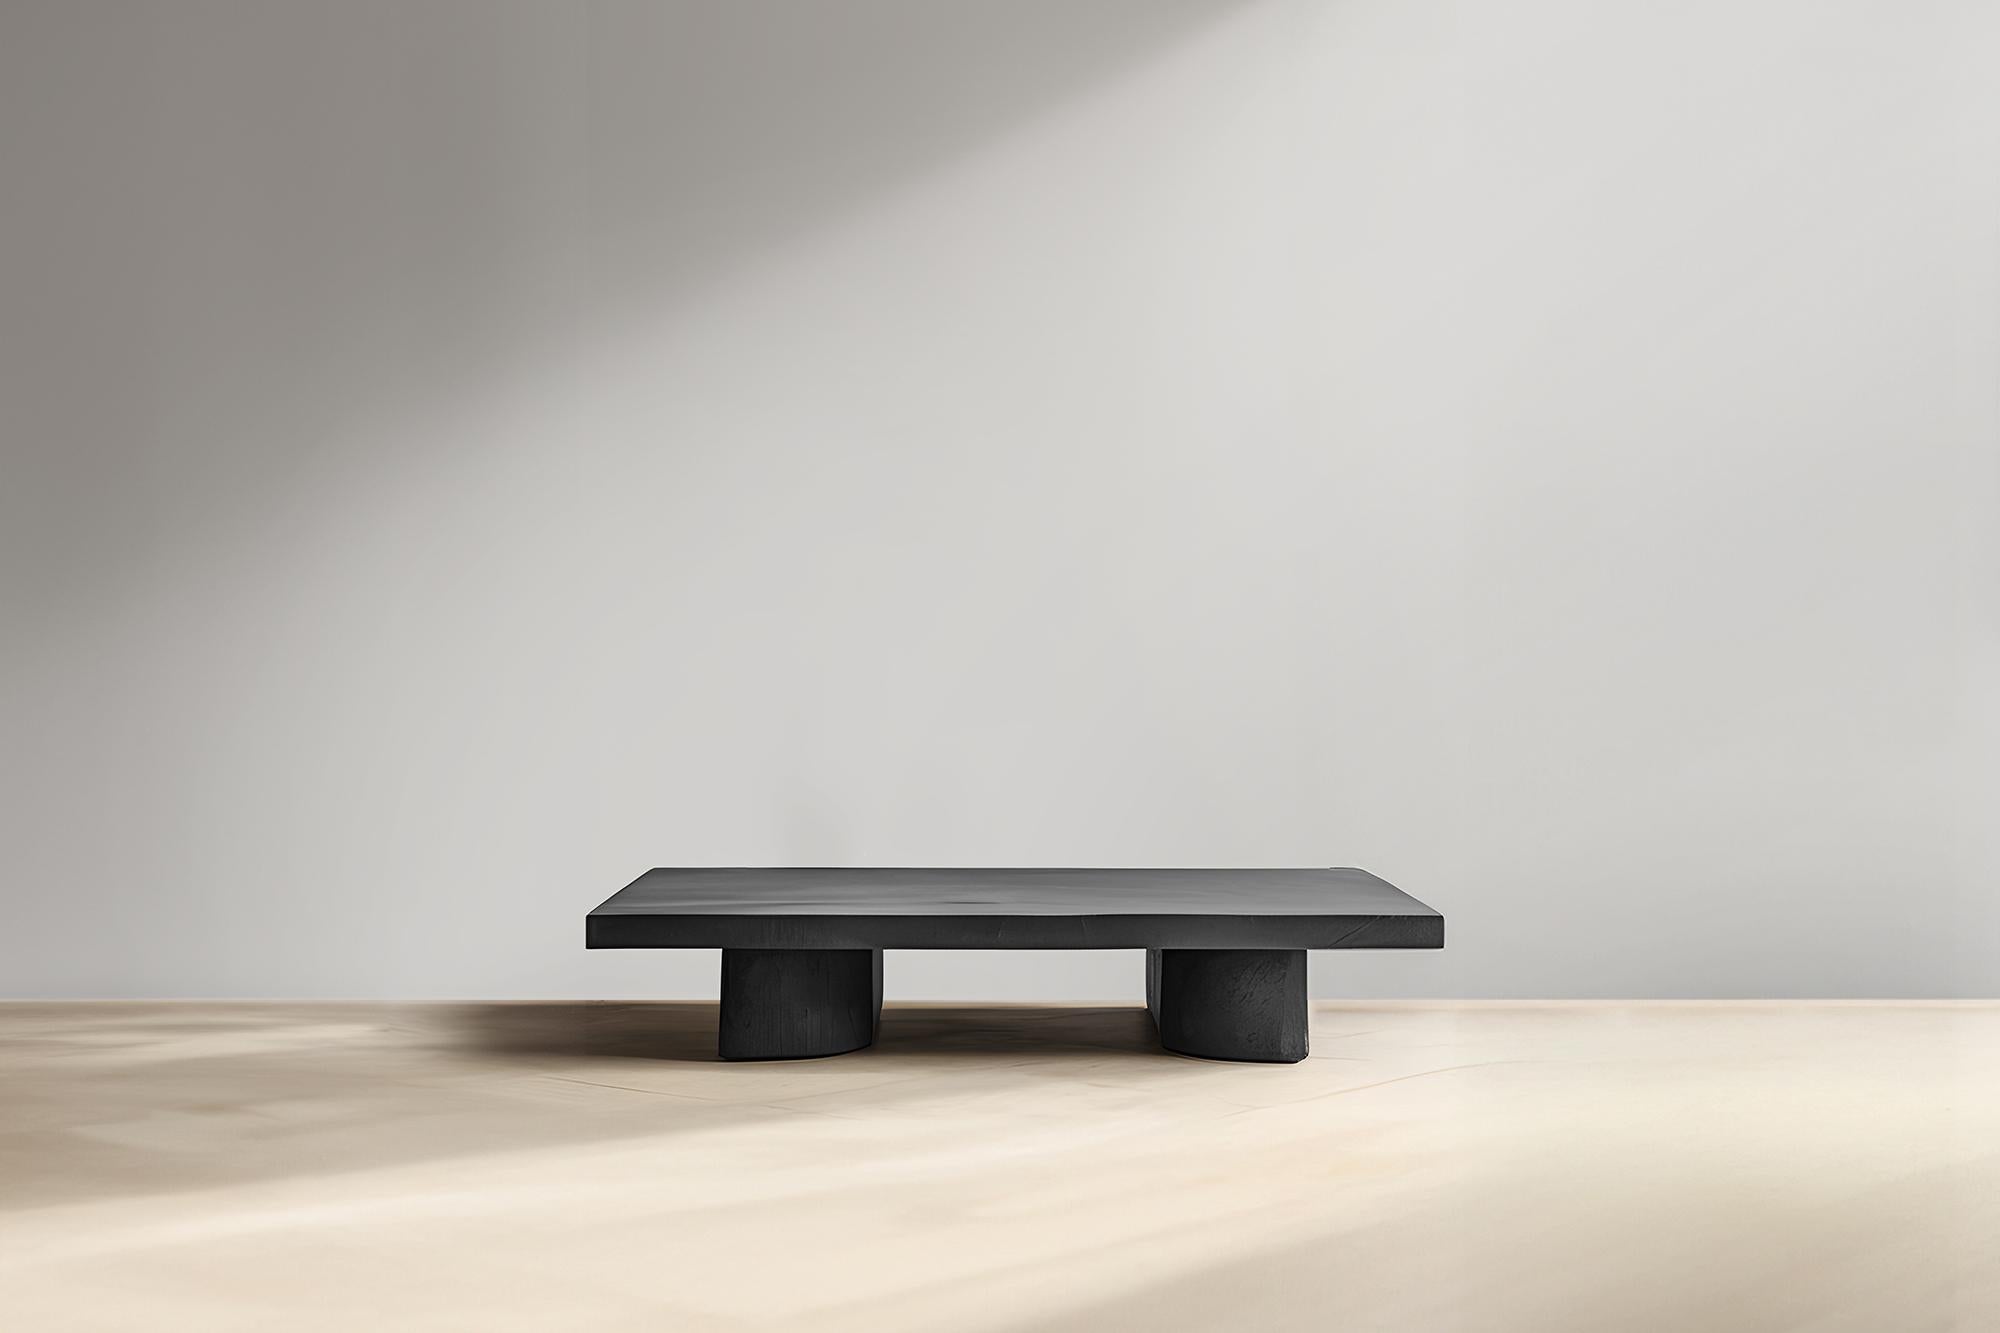 Statement Black Rectangular Coffee Table - Fundamenta 32 by NONO


Sculptural coffee table made of solid wood with a natural water-based or black tinted finish. Due to the nature of the production process, each piece may vary in grain, texture,